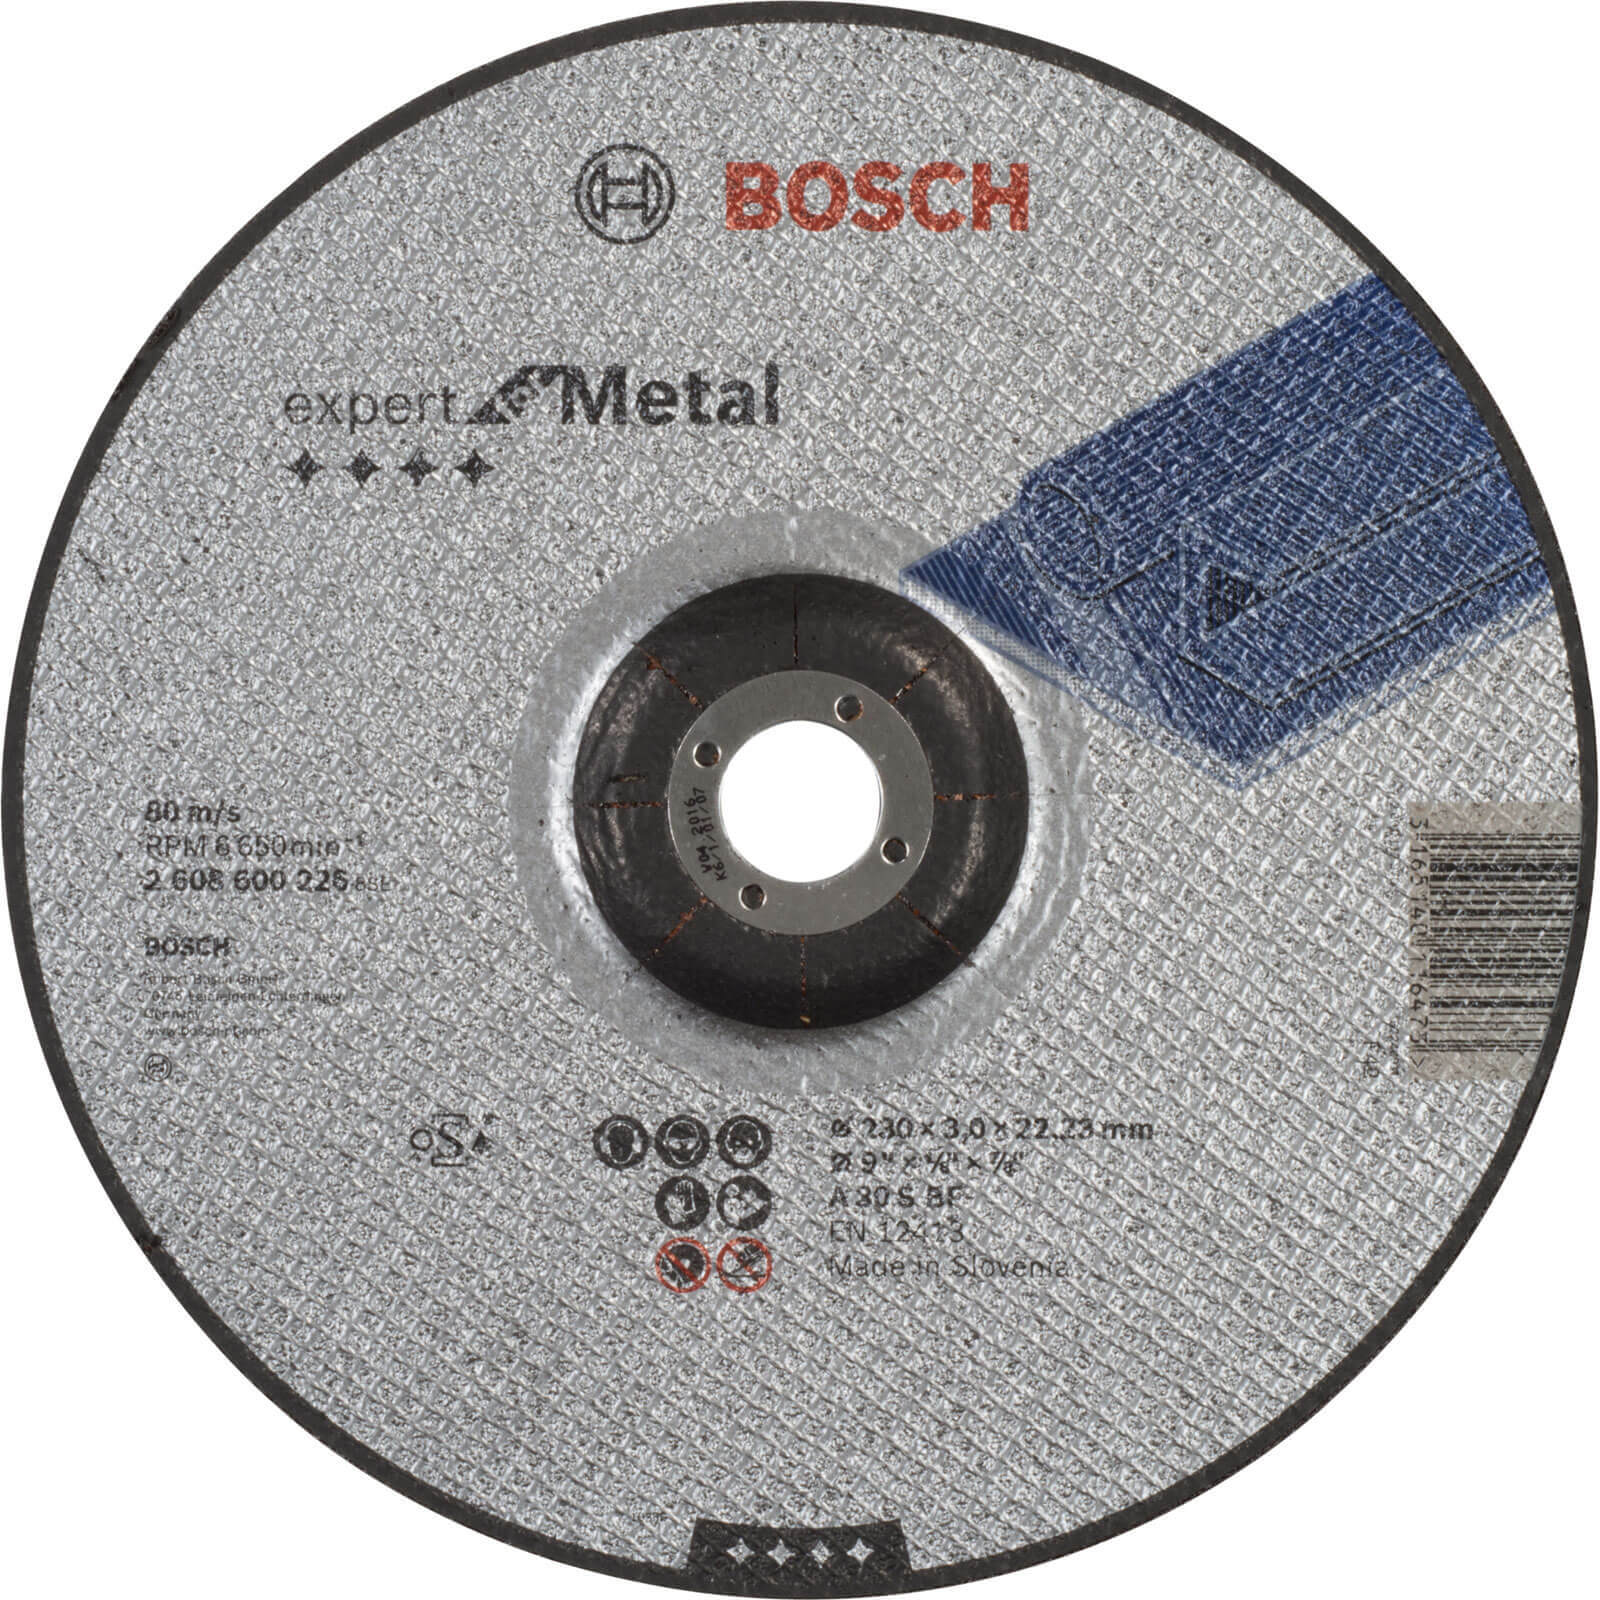 Photo of Bosch A30s Bf Depressed Centre Metal Cutting Disc 230mm